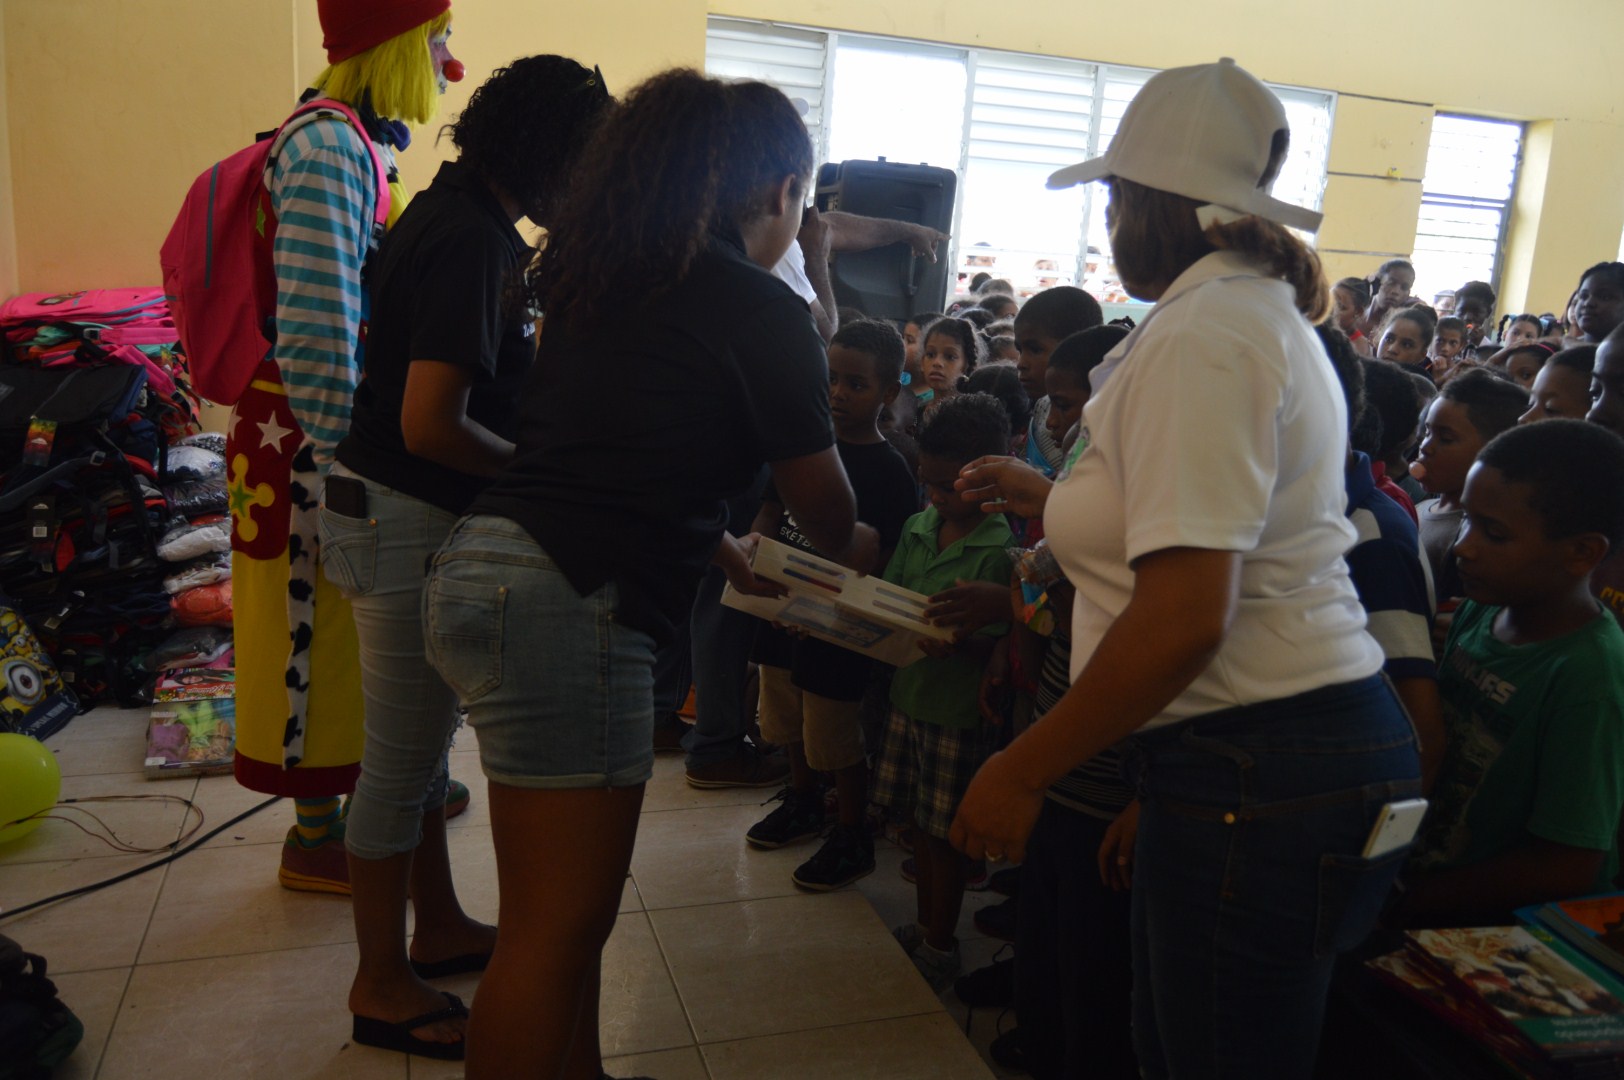 Two staff giving a child a toy, the clown beside them